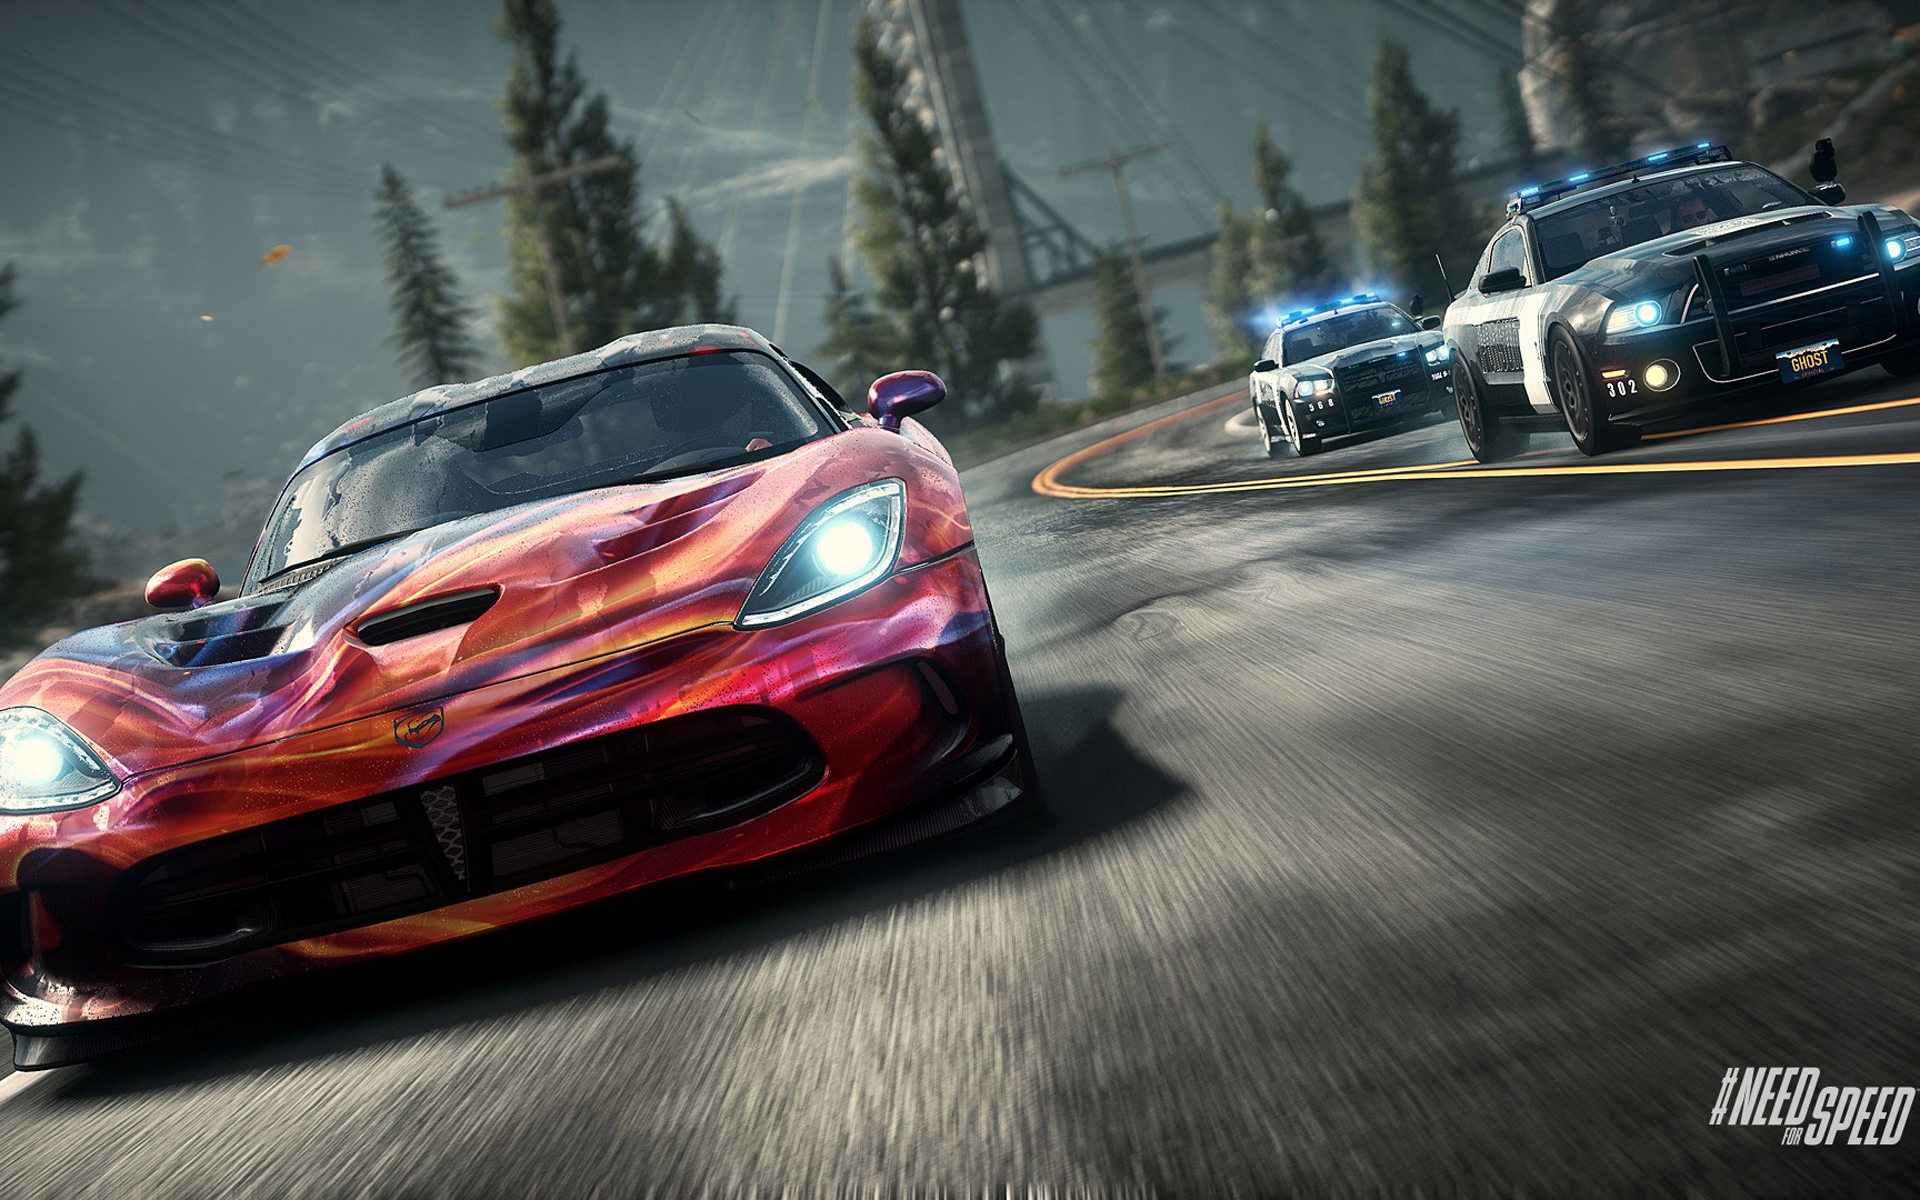 Tag Need For Speed Rivals HD Wallpaper